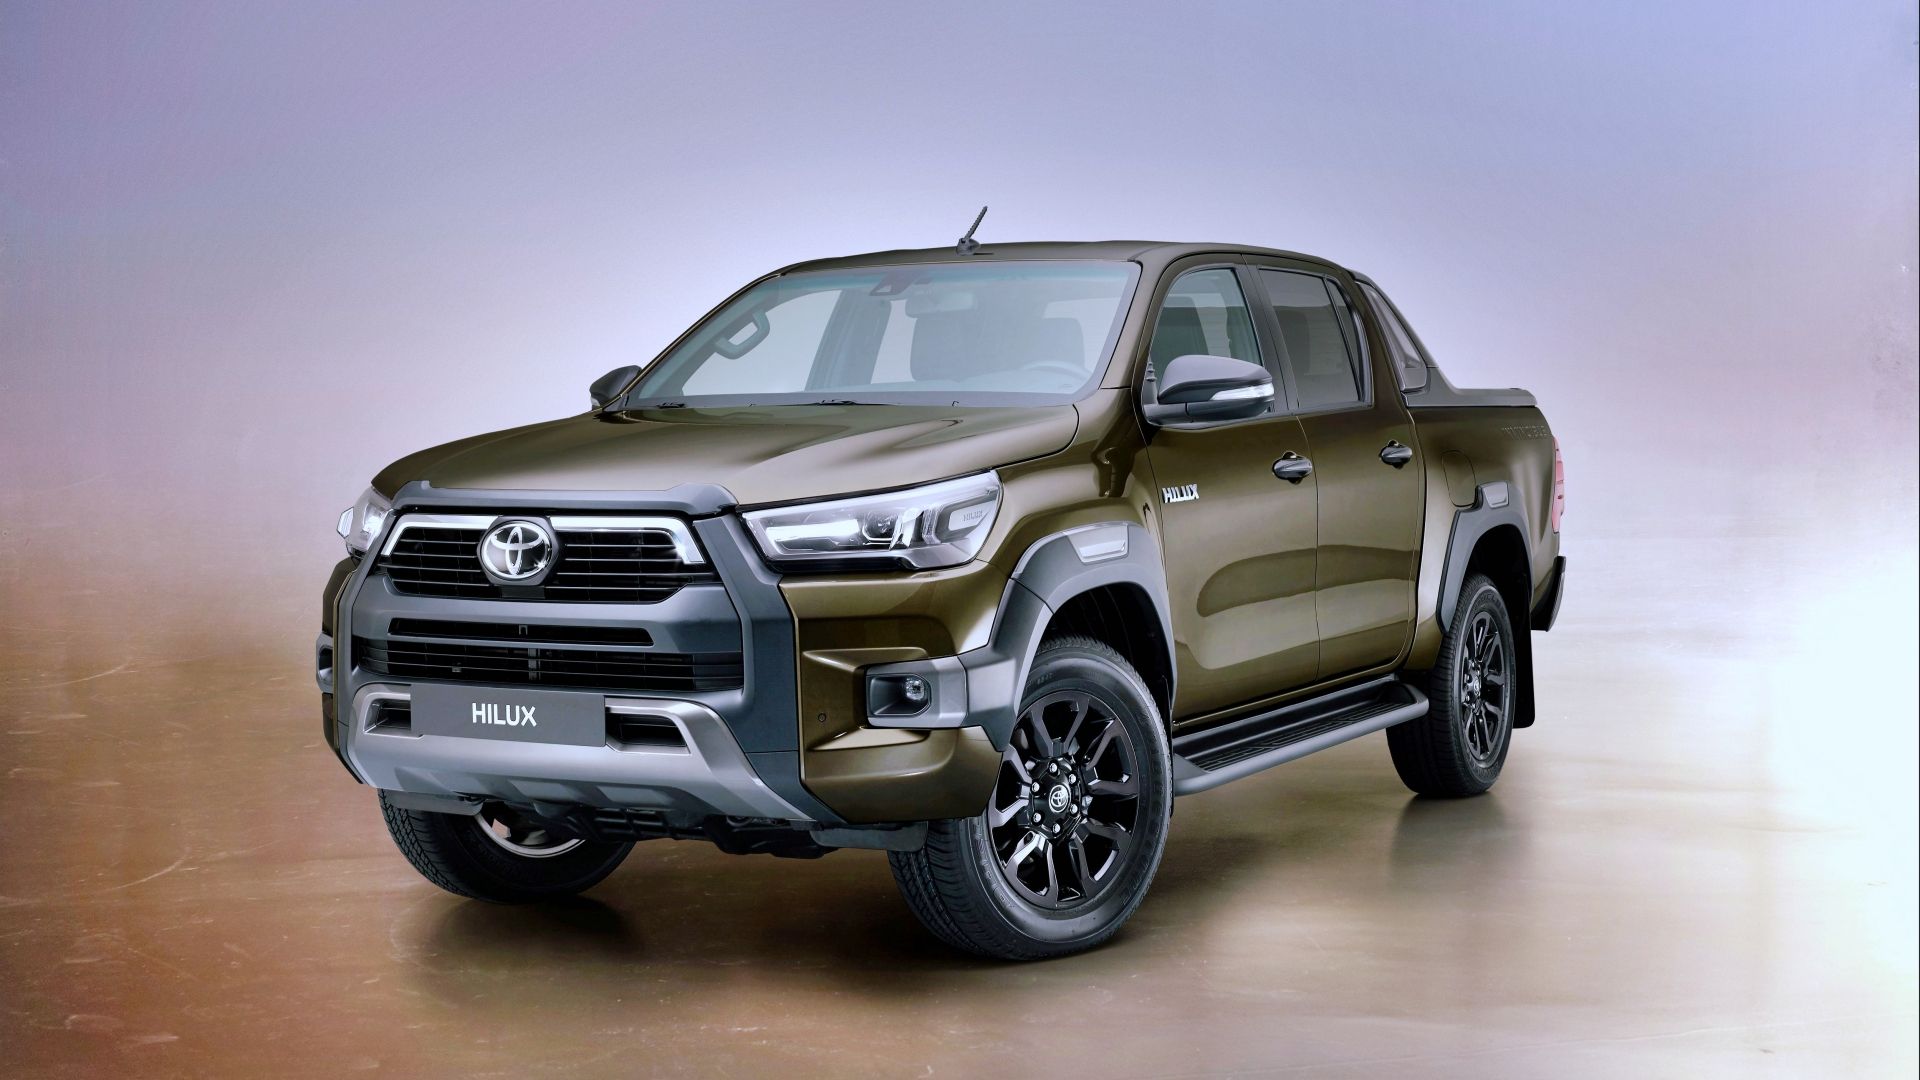 Brown Toyota Hilux